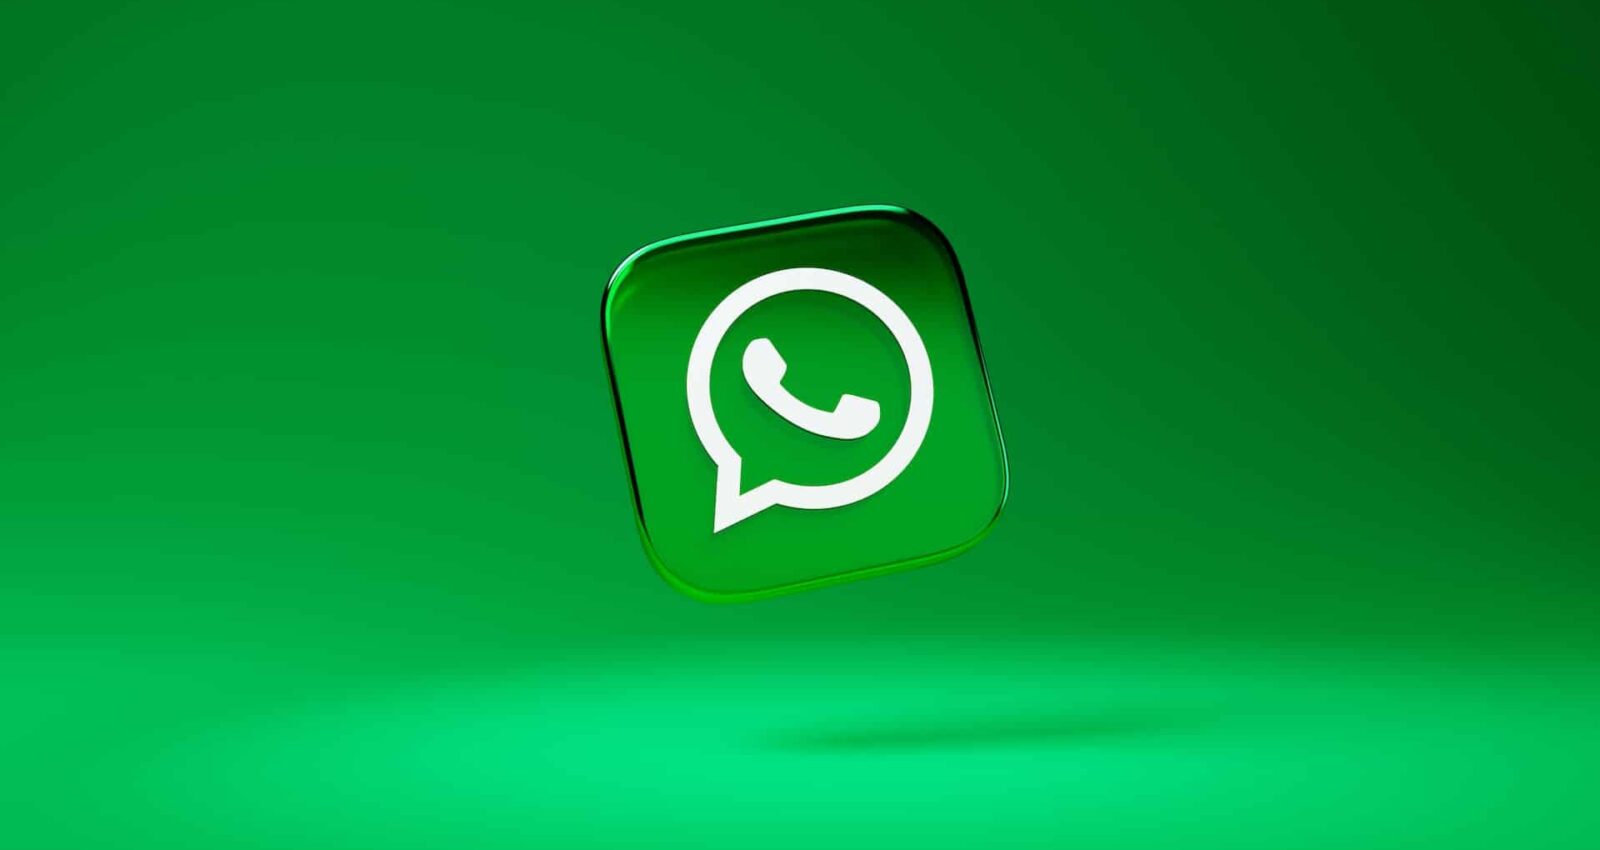 WhatsApp Testing New Feature Similar to Android’s “Share Nearby”